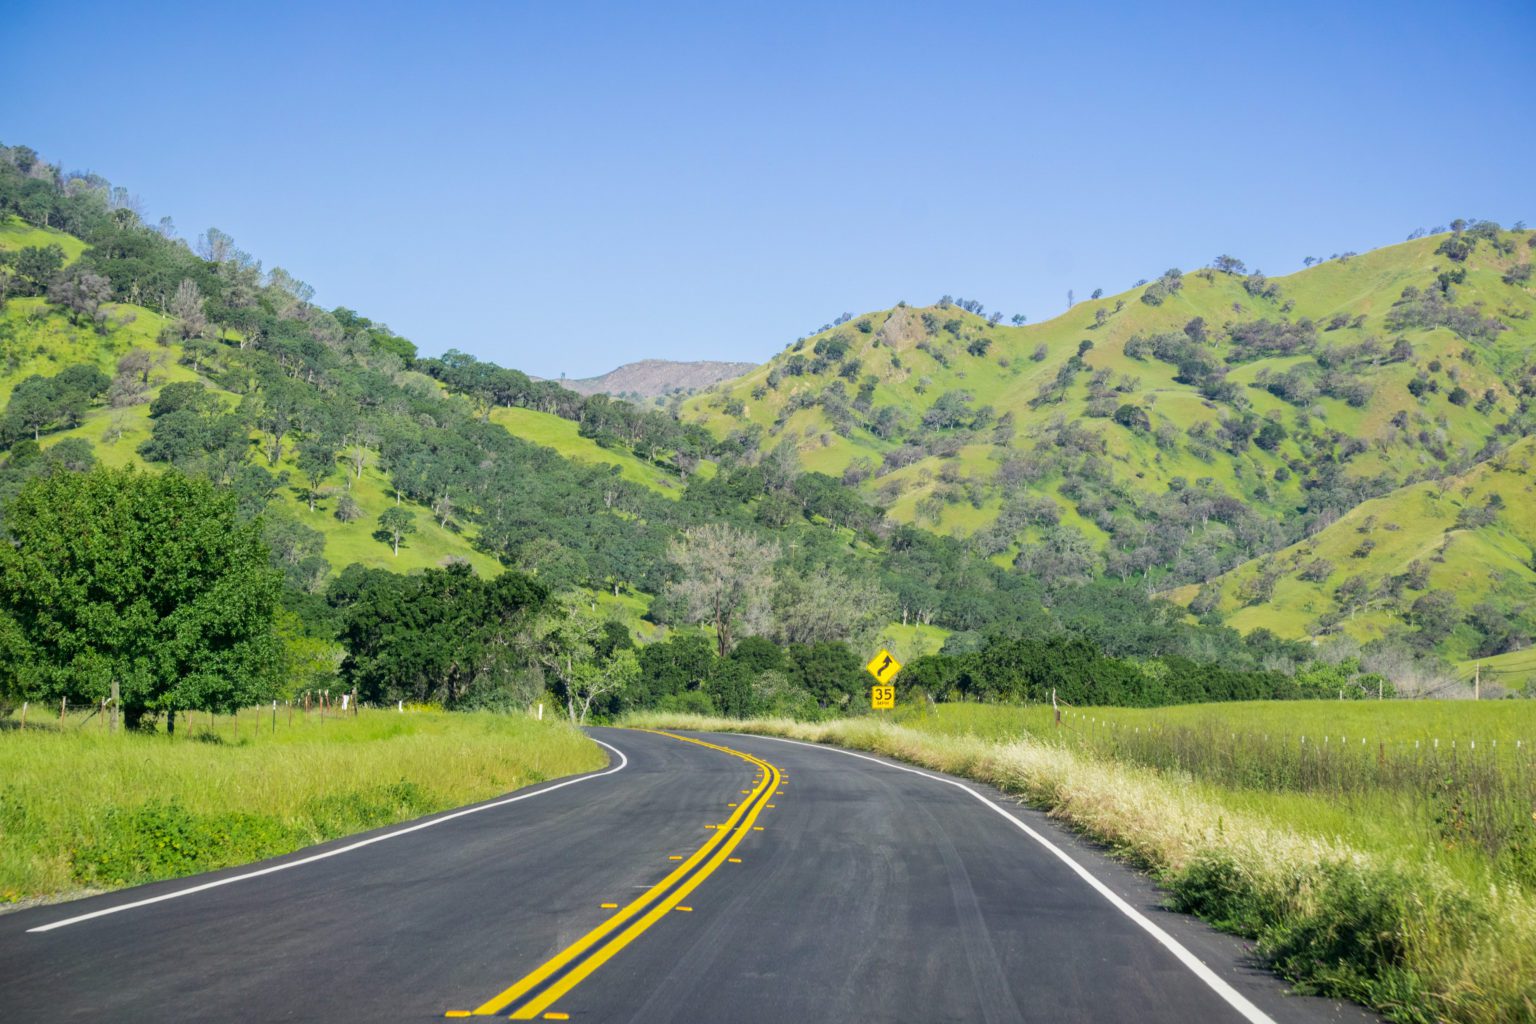 A scenic drive through the verdant hills of Sonoma Valley, California.